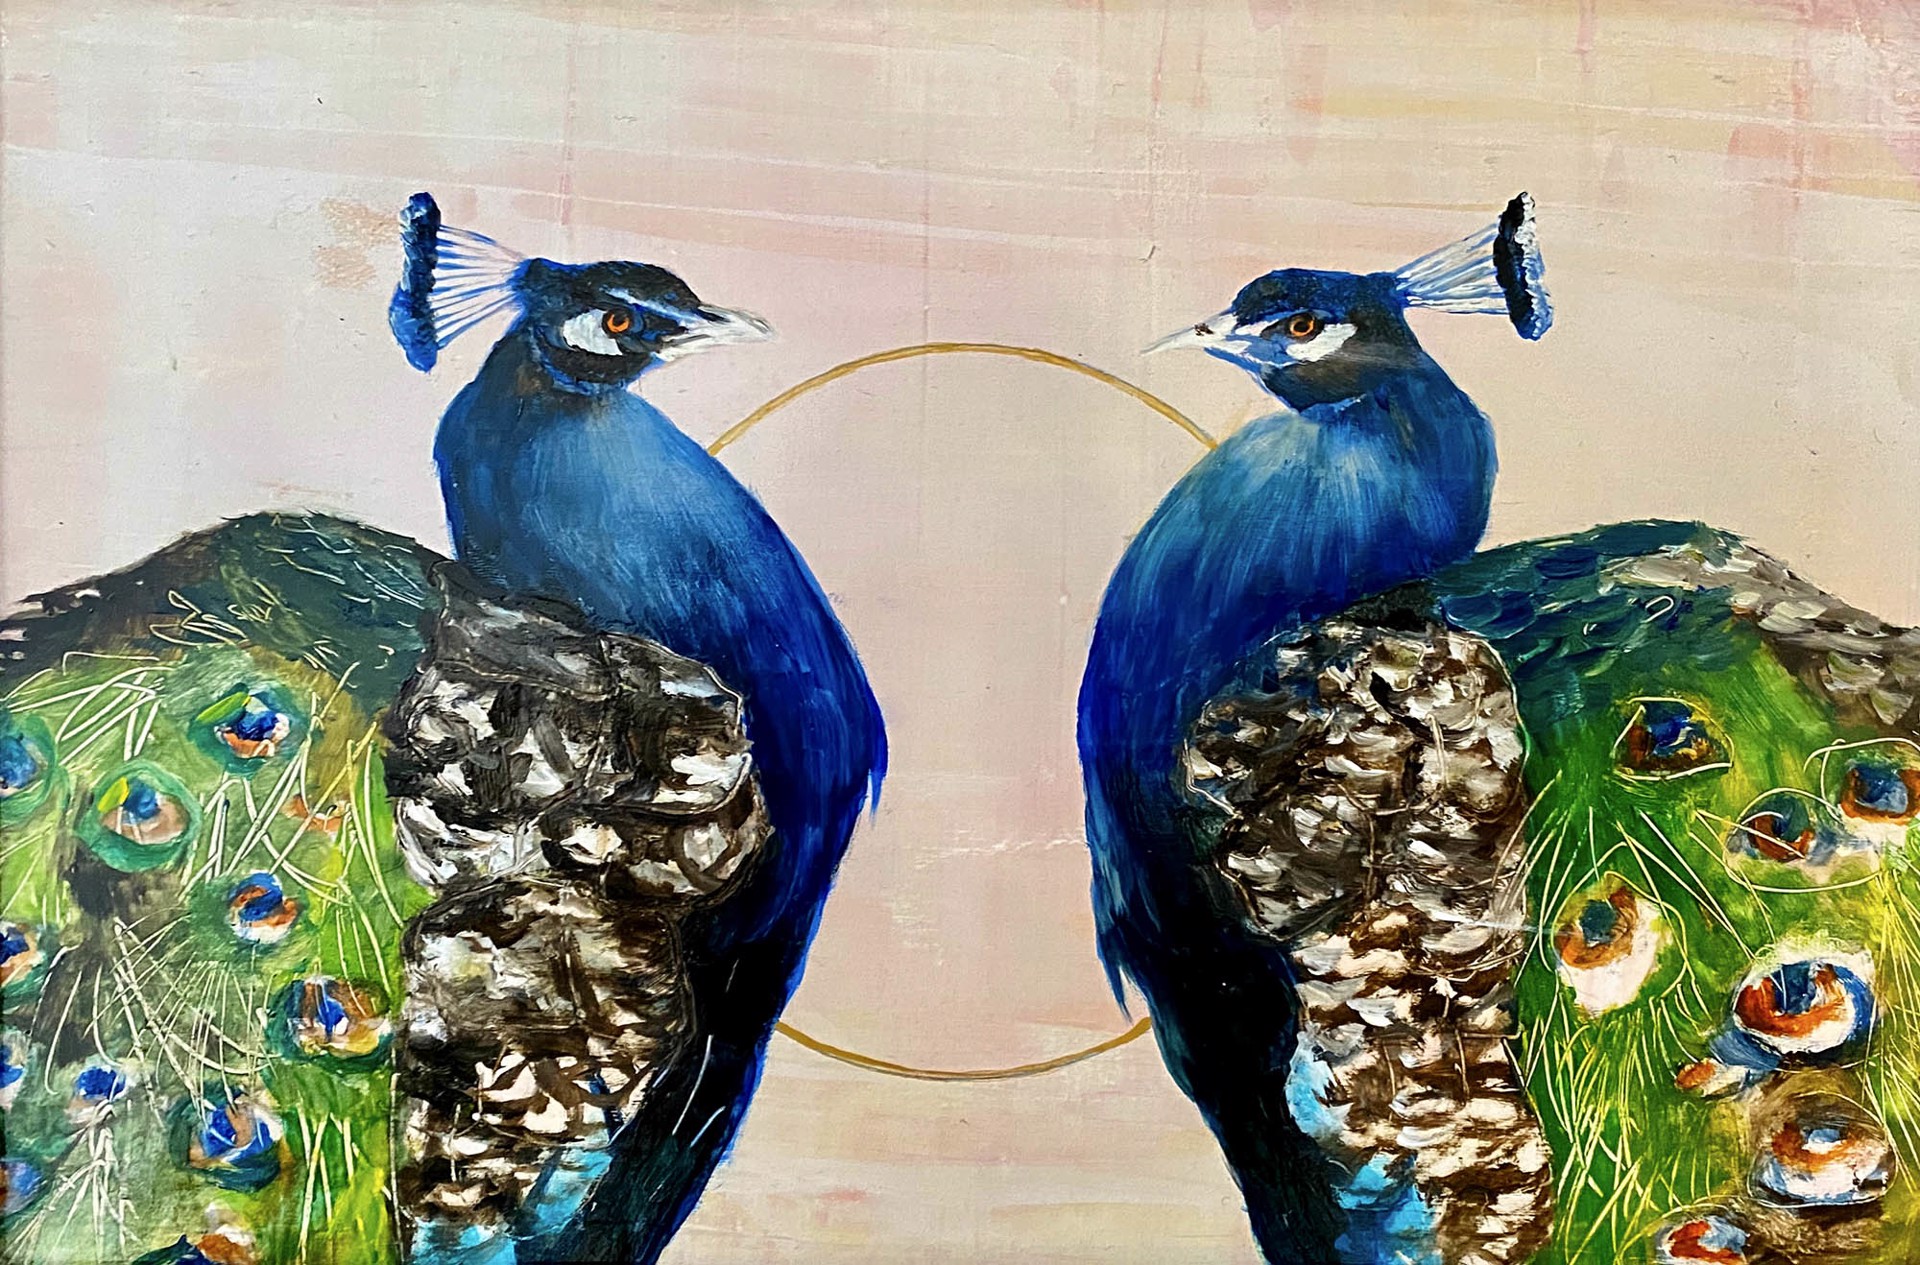 Original Oil Painting Of Two Male Peacocks Facing Each Other In Front Of A Gold Circle With A Light Contemporary Background, By Jenna Von Benedikt